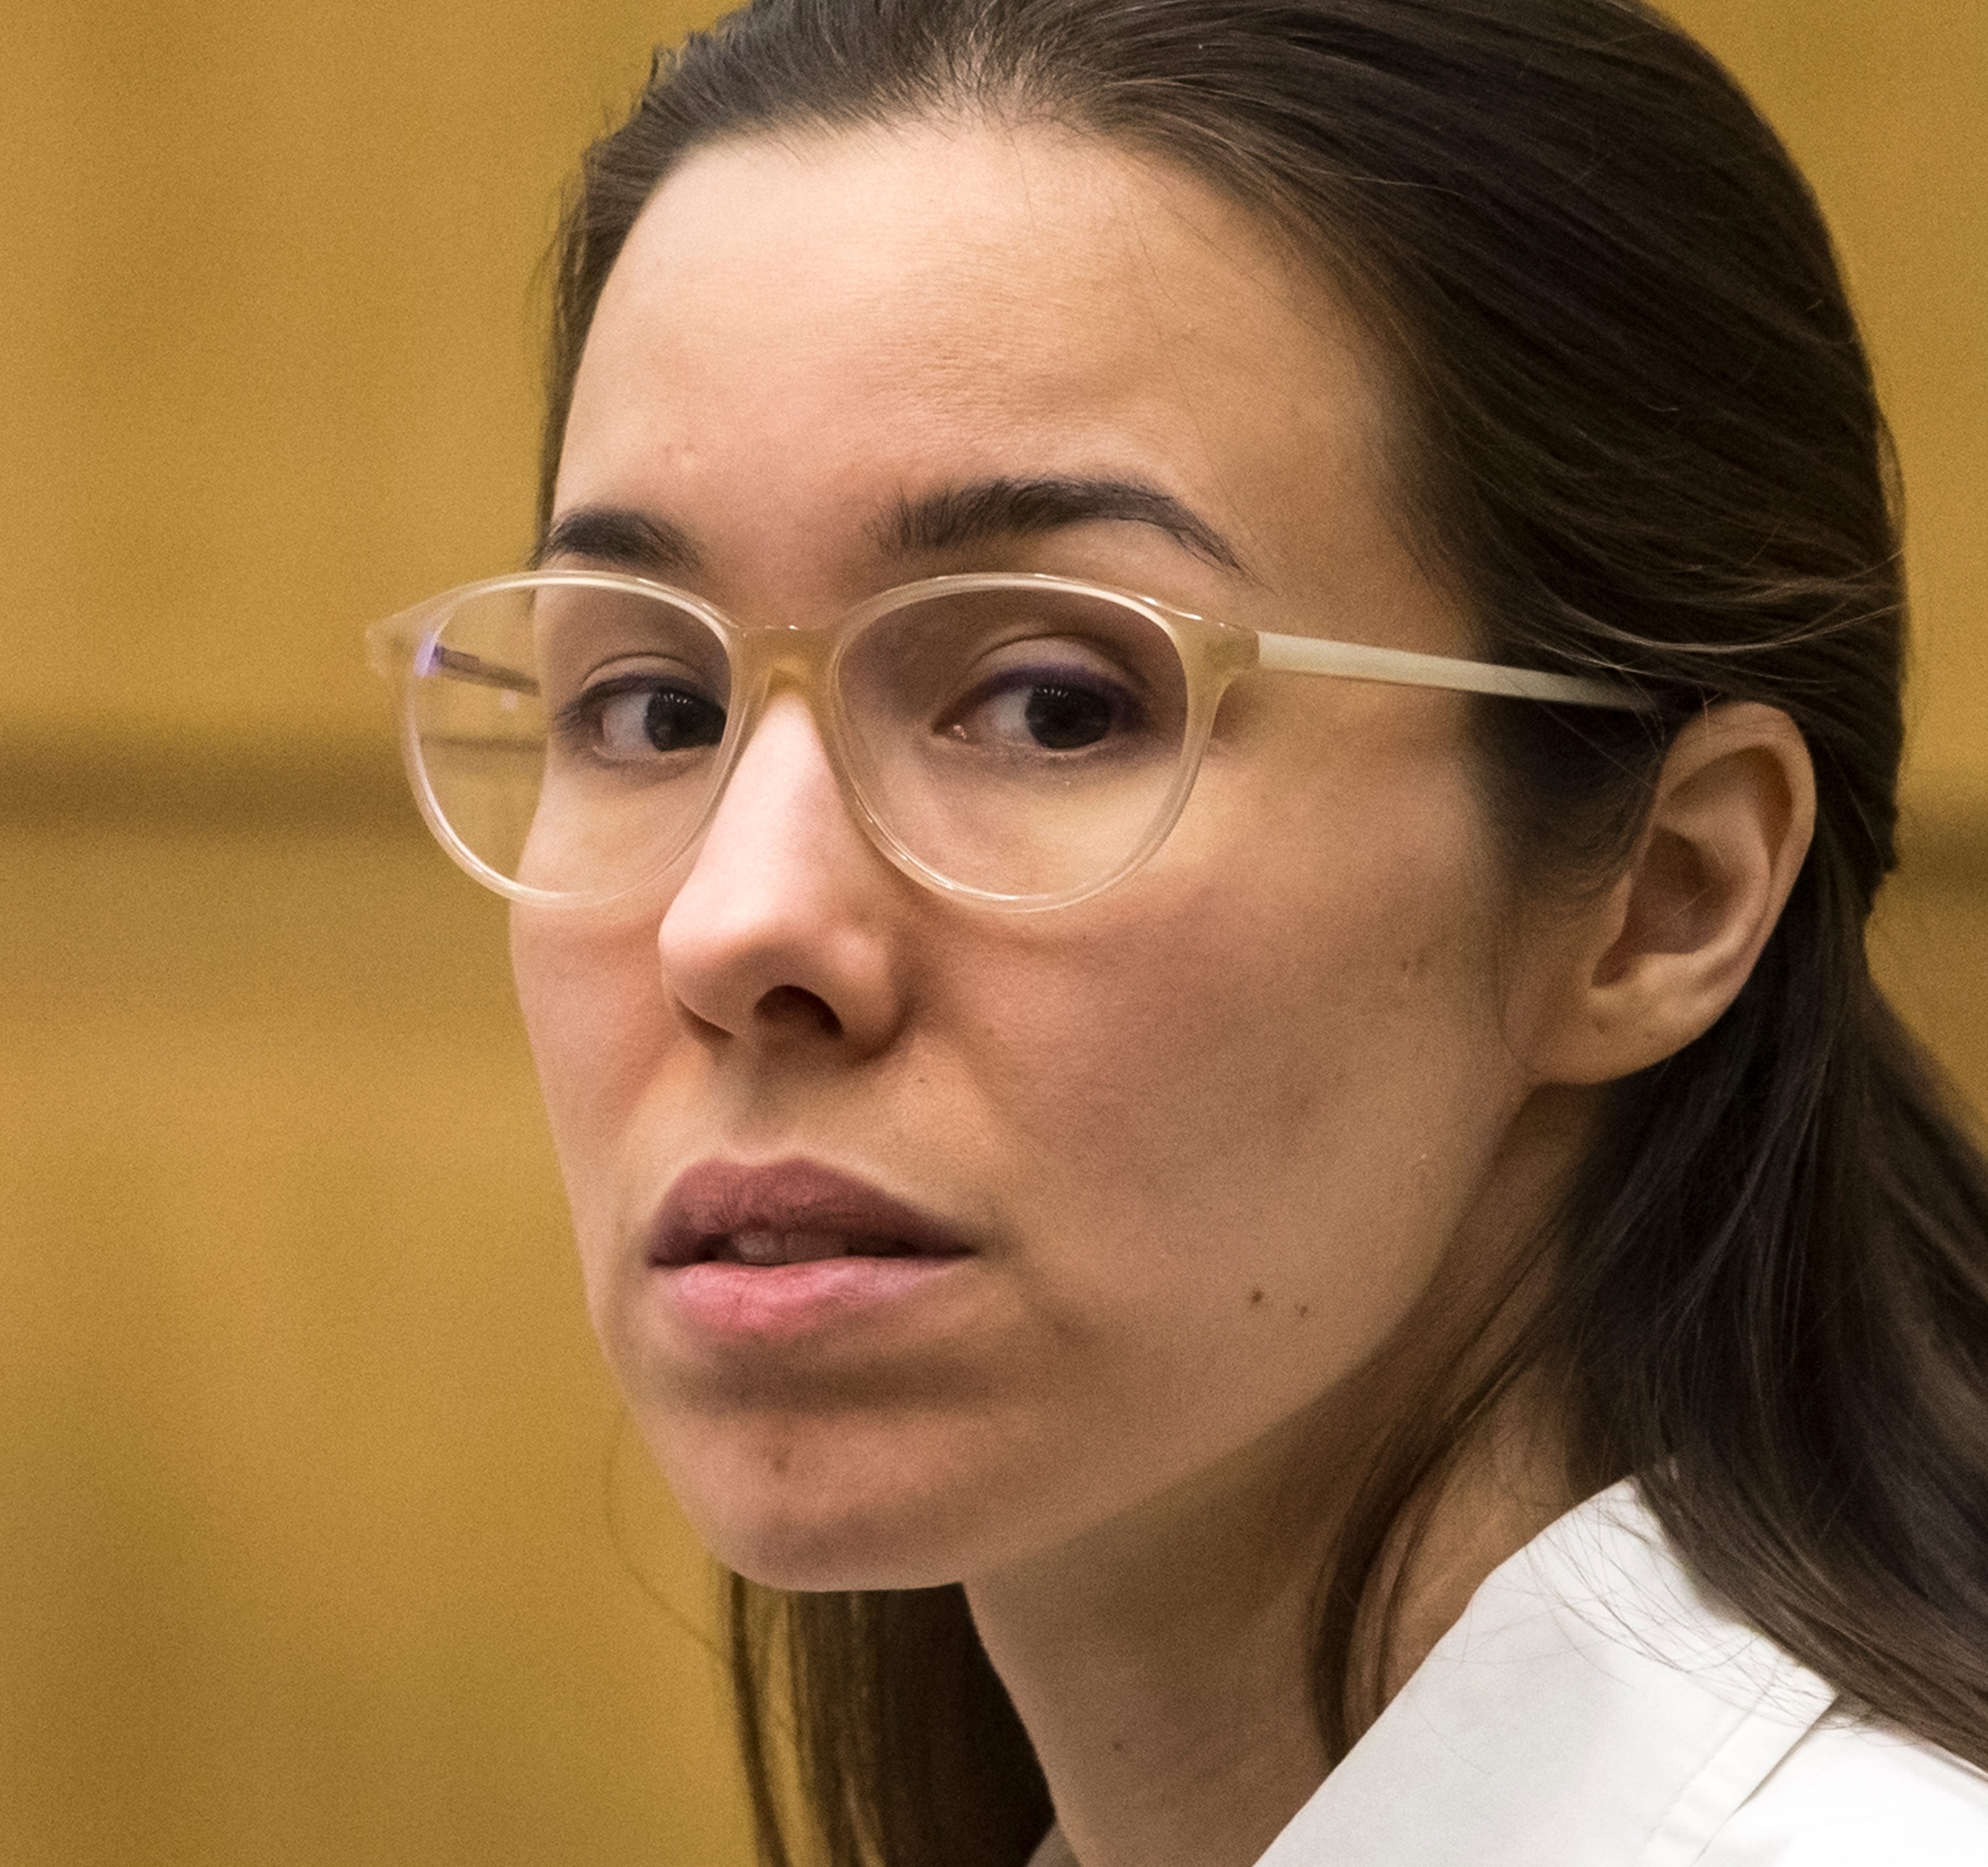 As JODI ARIAS trial resumes, what will the public hear?